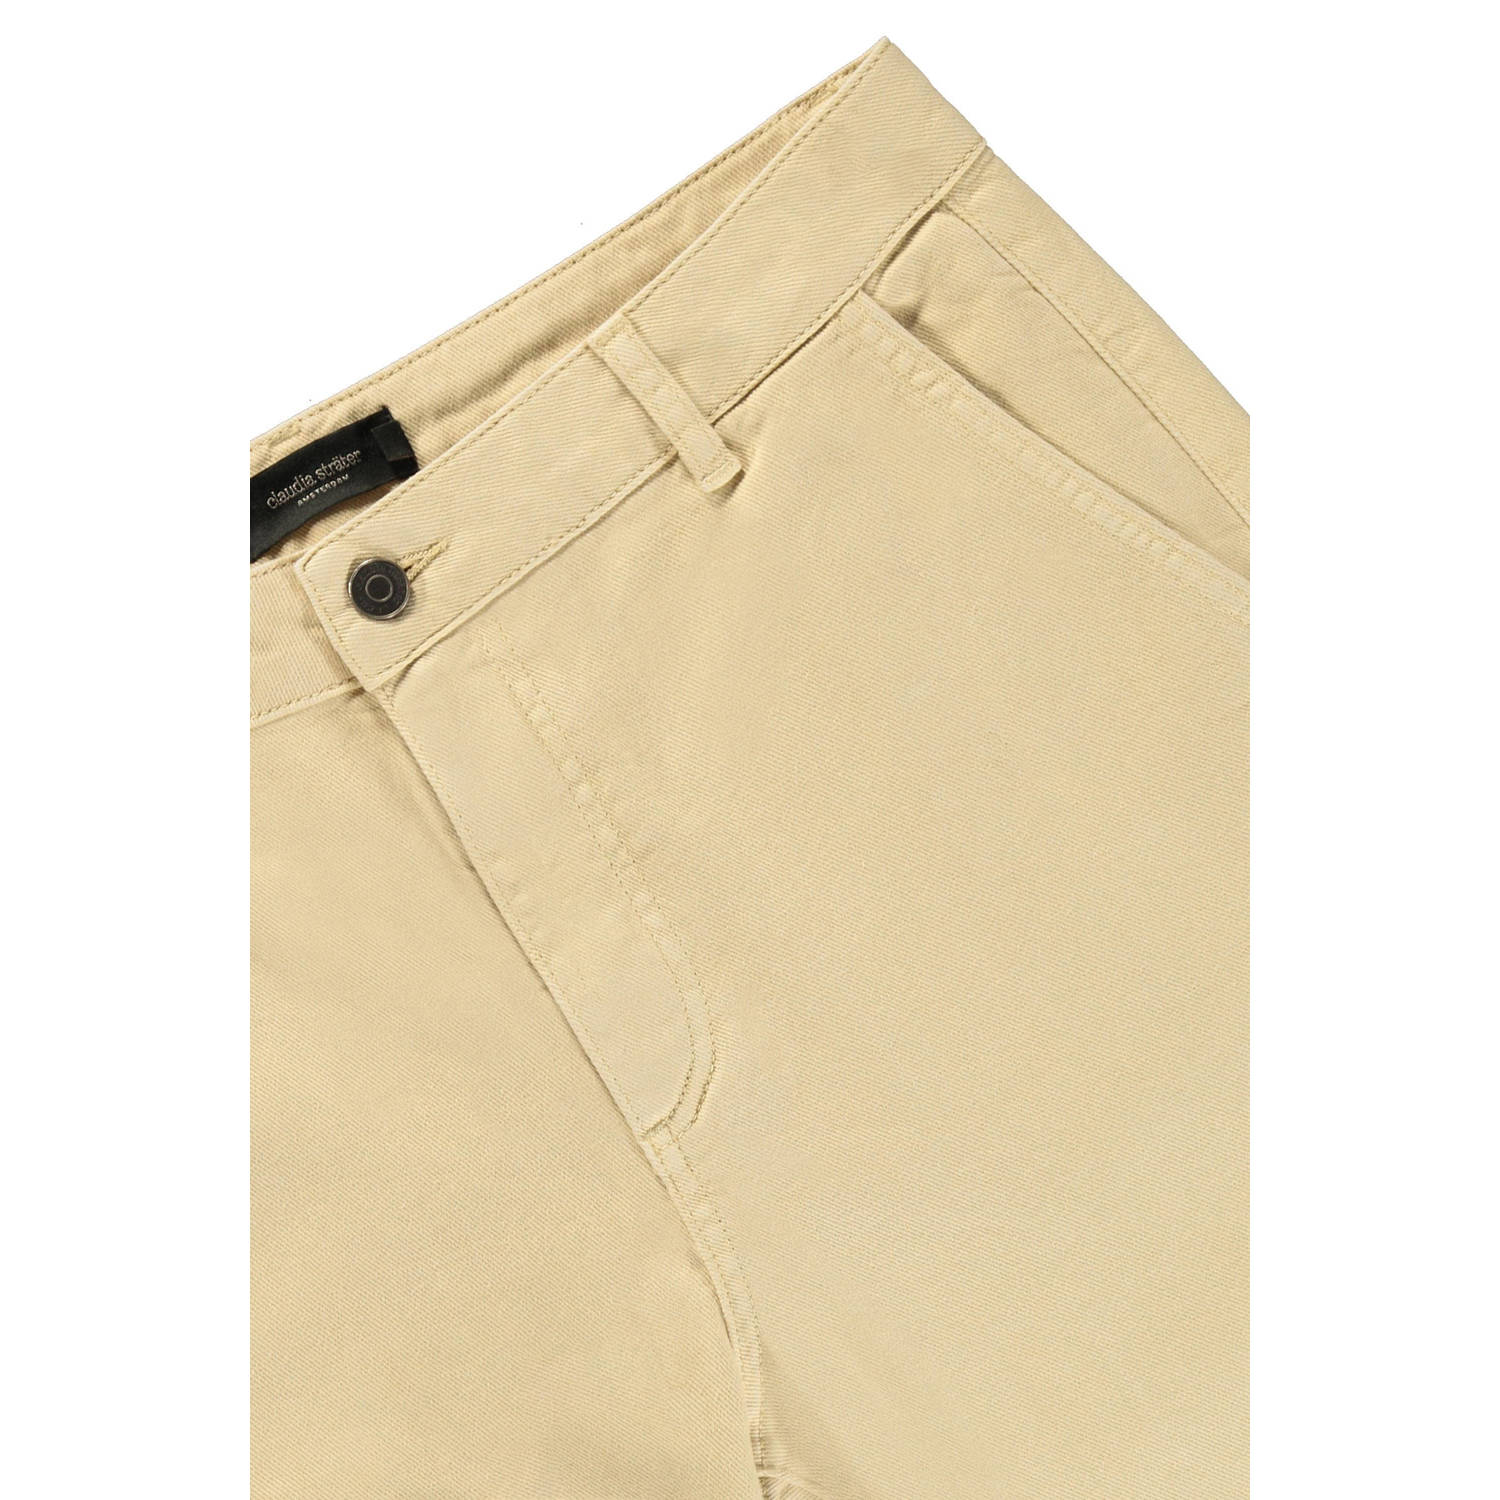 Claudia Sträter cropped tapered fit broek beige